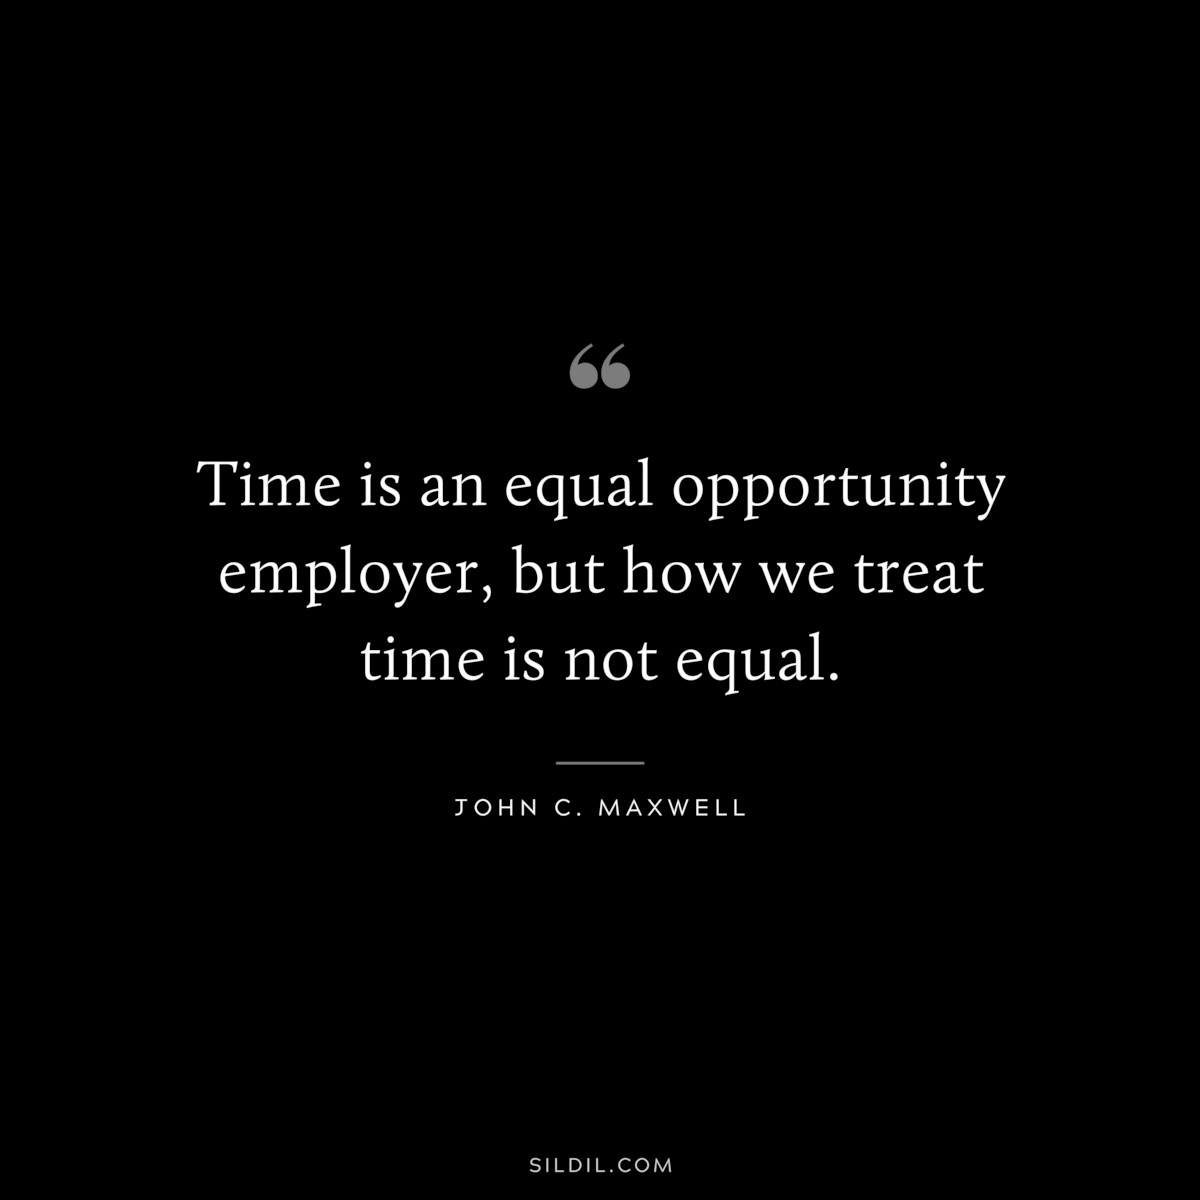 Time is an equal opportunity employer, but how we treat time is not equal. ― John C. Maxwell